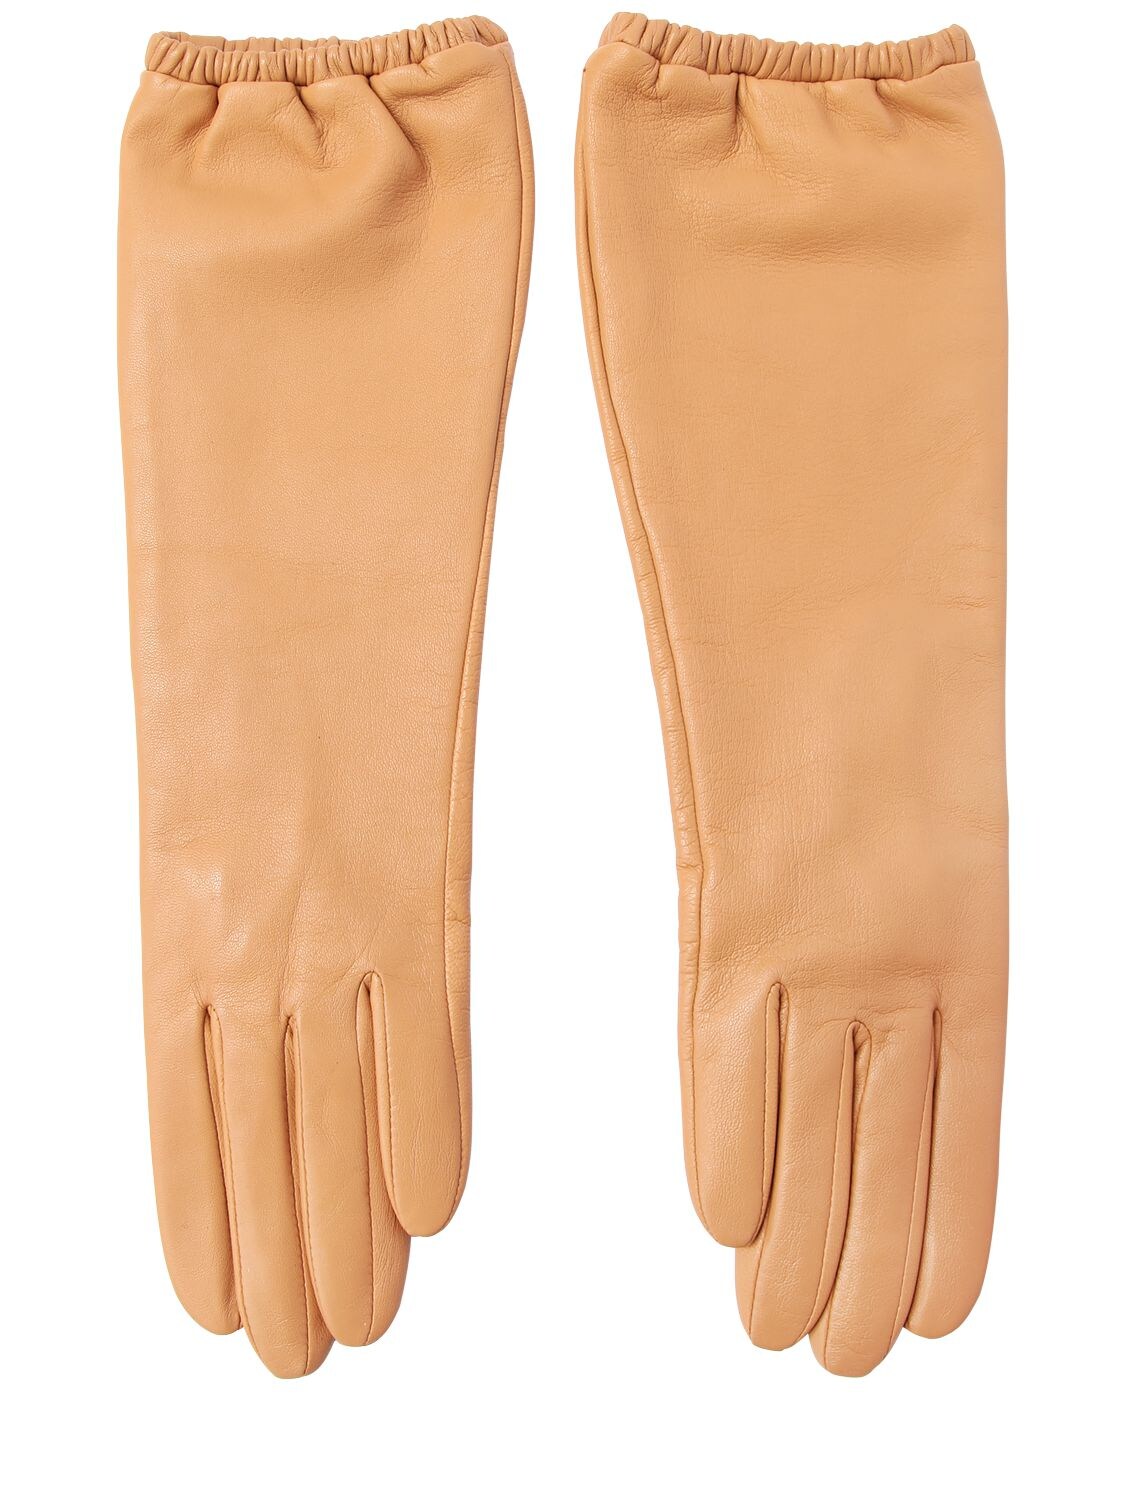 Aristide Long Nappa Leather Gloves In Light Brown